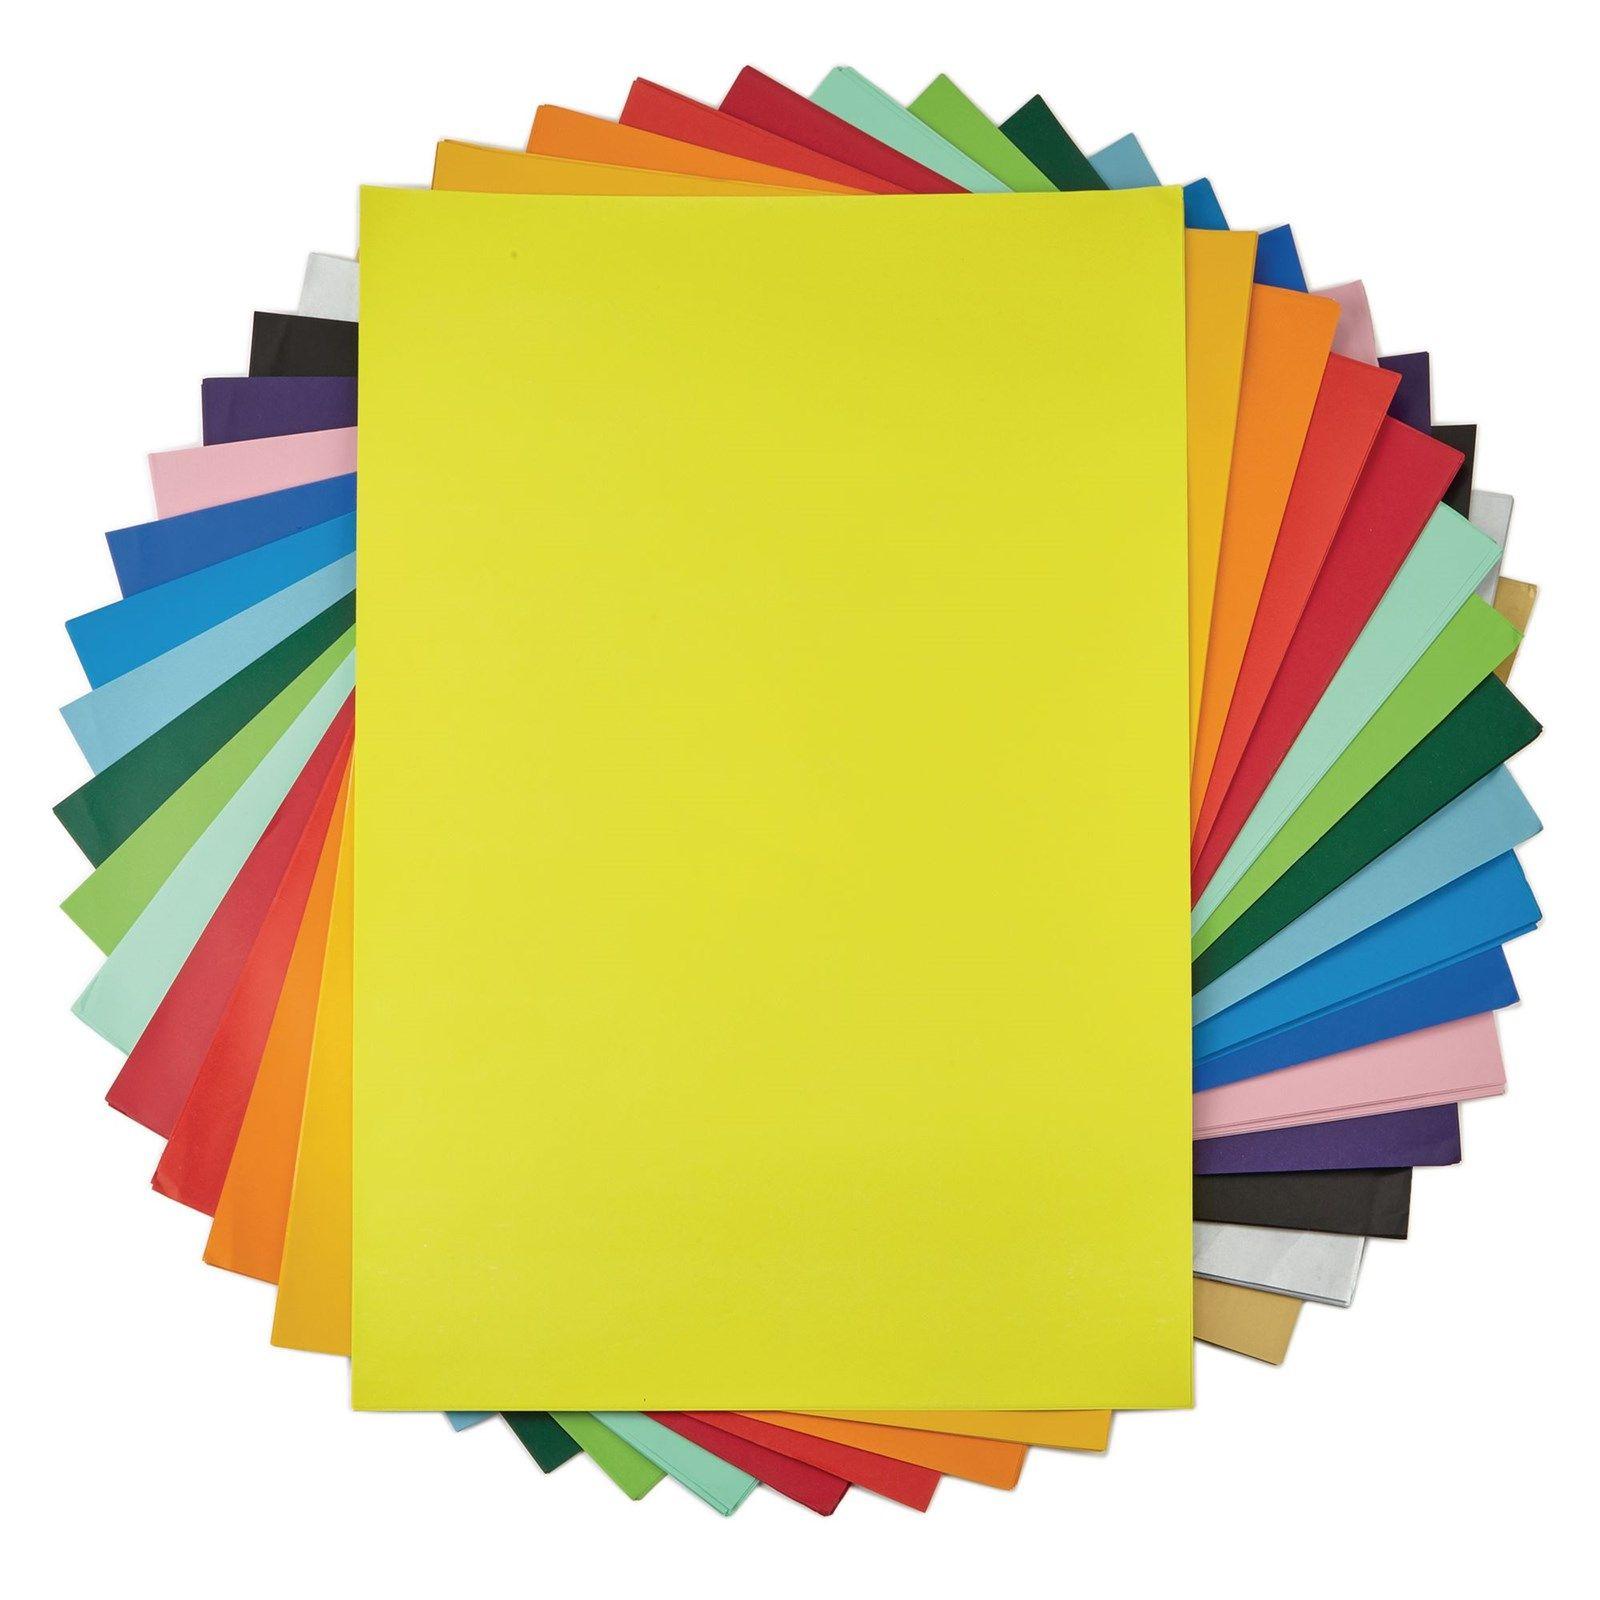 Yellow Sheets of Paper Logo - Classmates Poster Paper Sheets 510mm x 760mm of 25